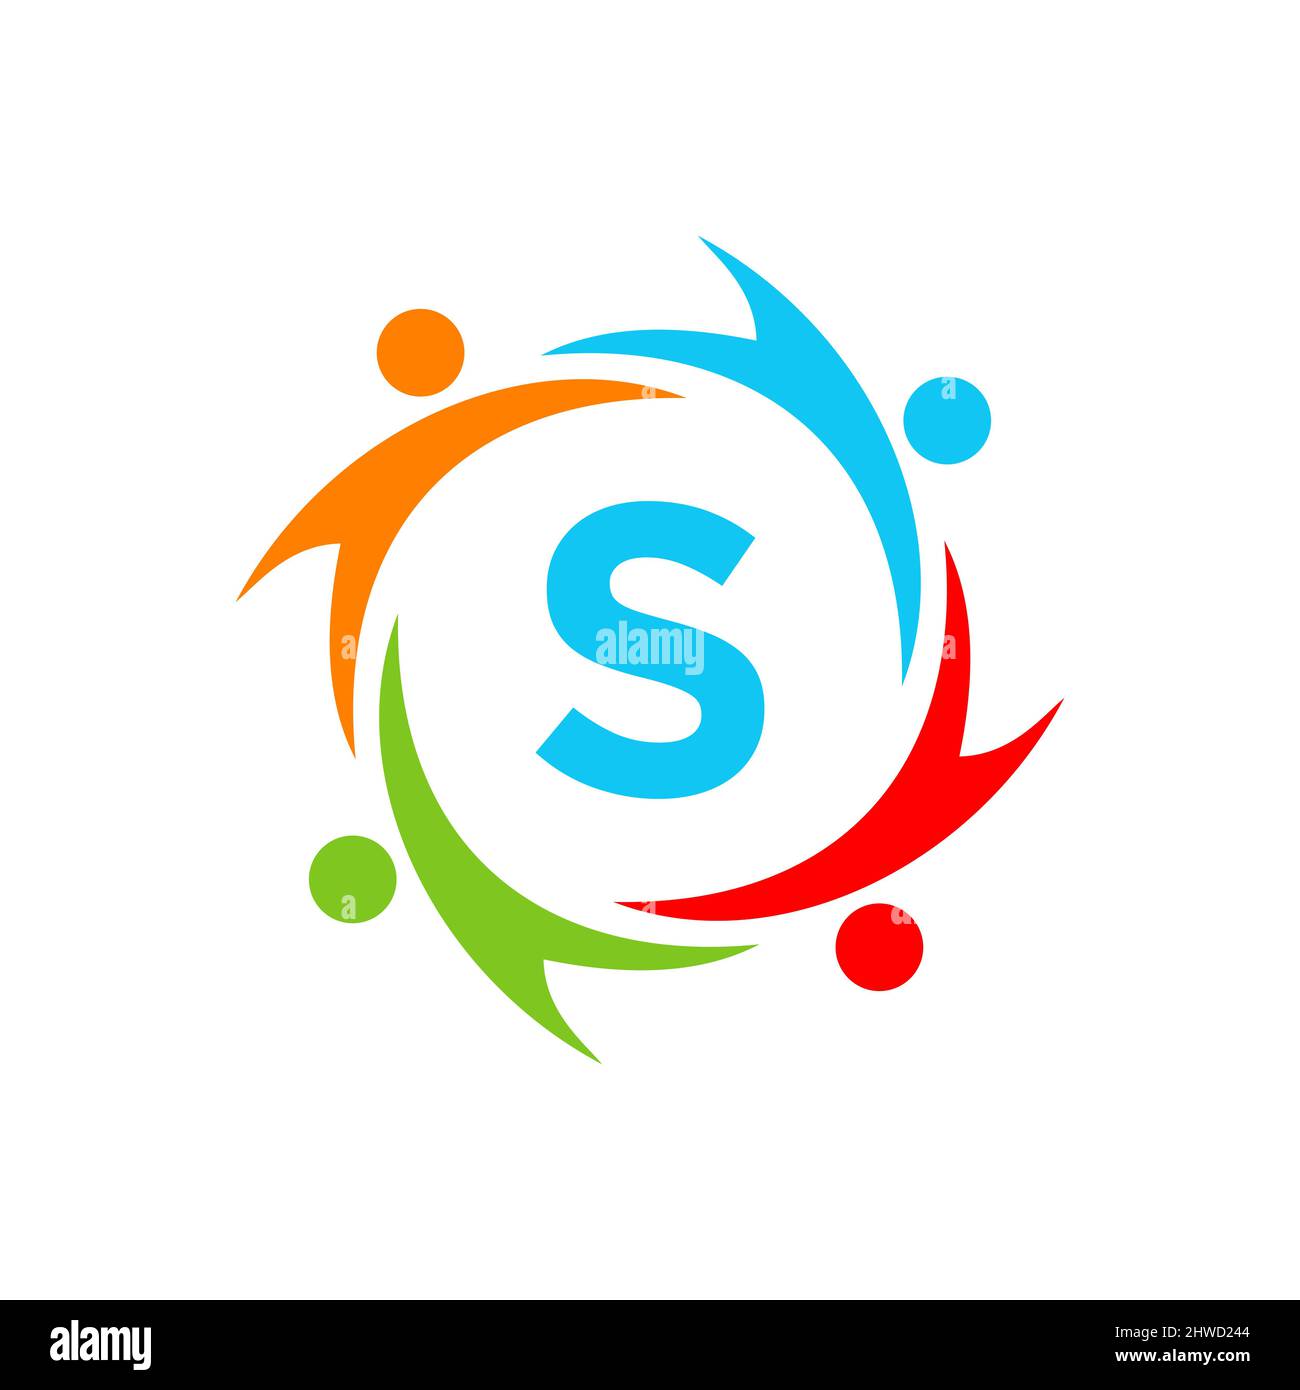 Charity Logo Template On Letter S, Initial Unity Foundation Human Logo Sign. Unity Team Work Logo Design With S Letter Template Stock Vector